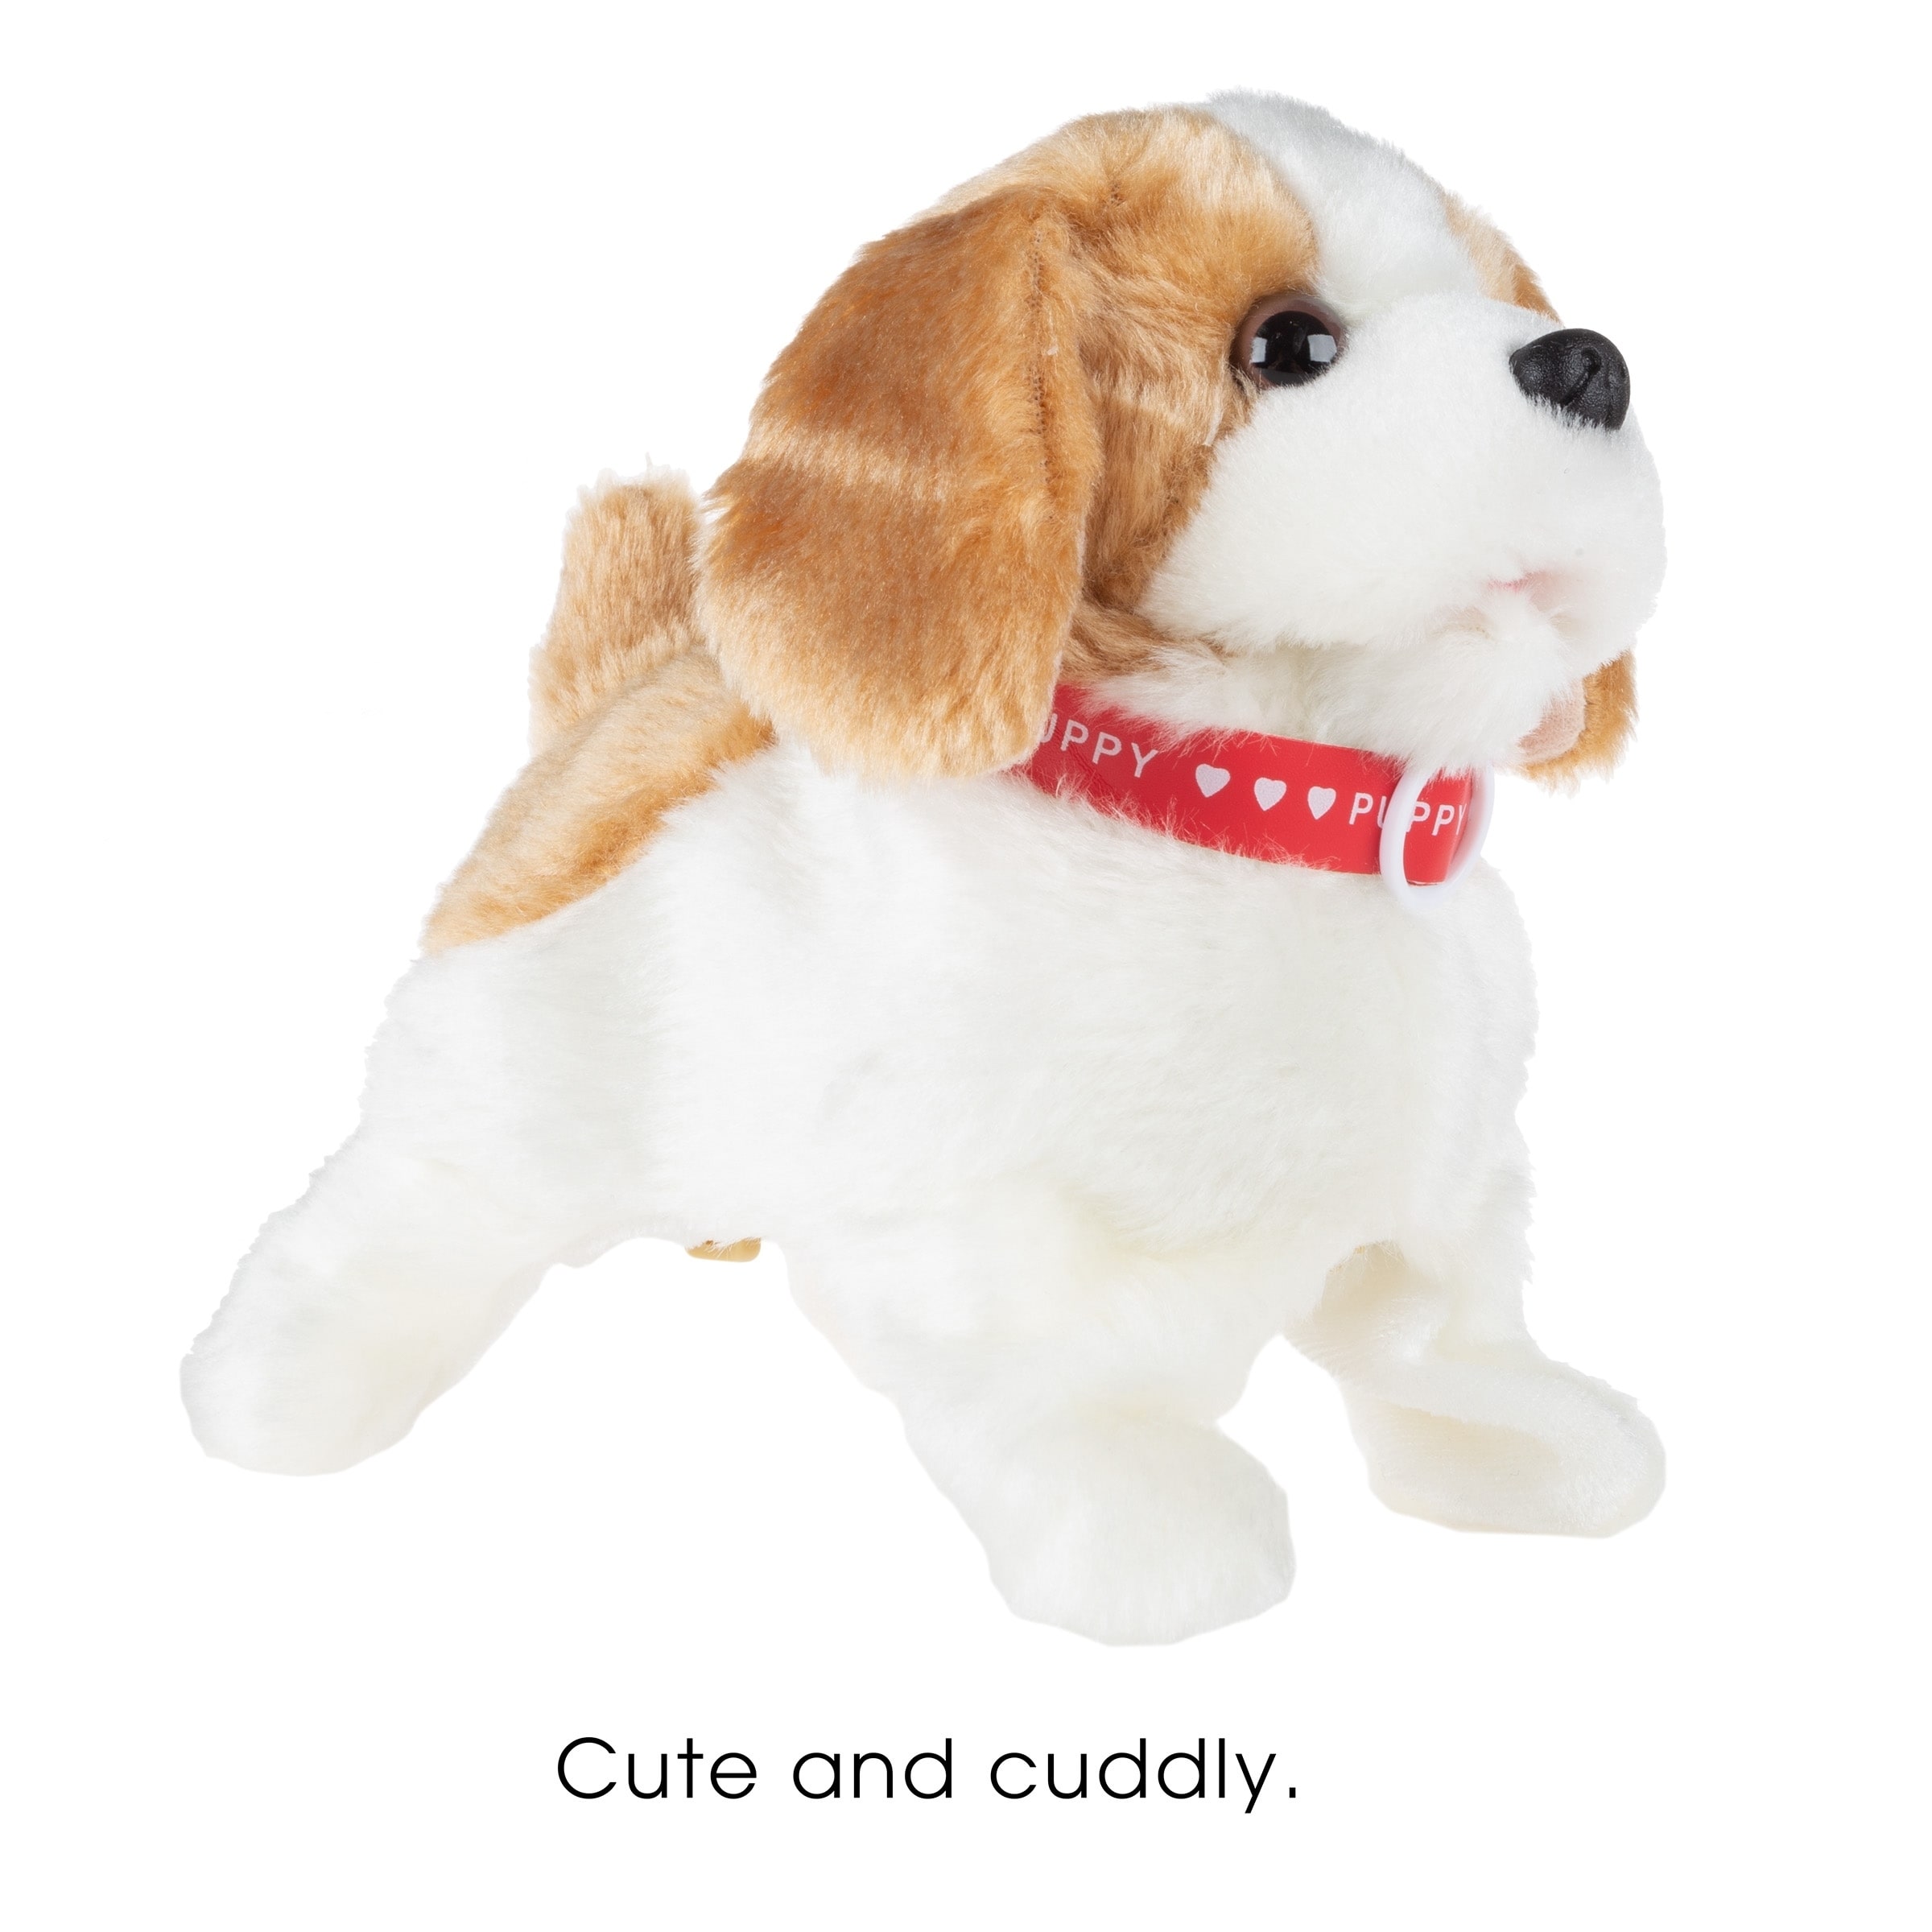 toy puppy that walks and barks